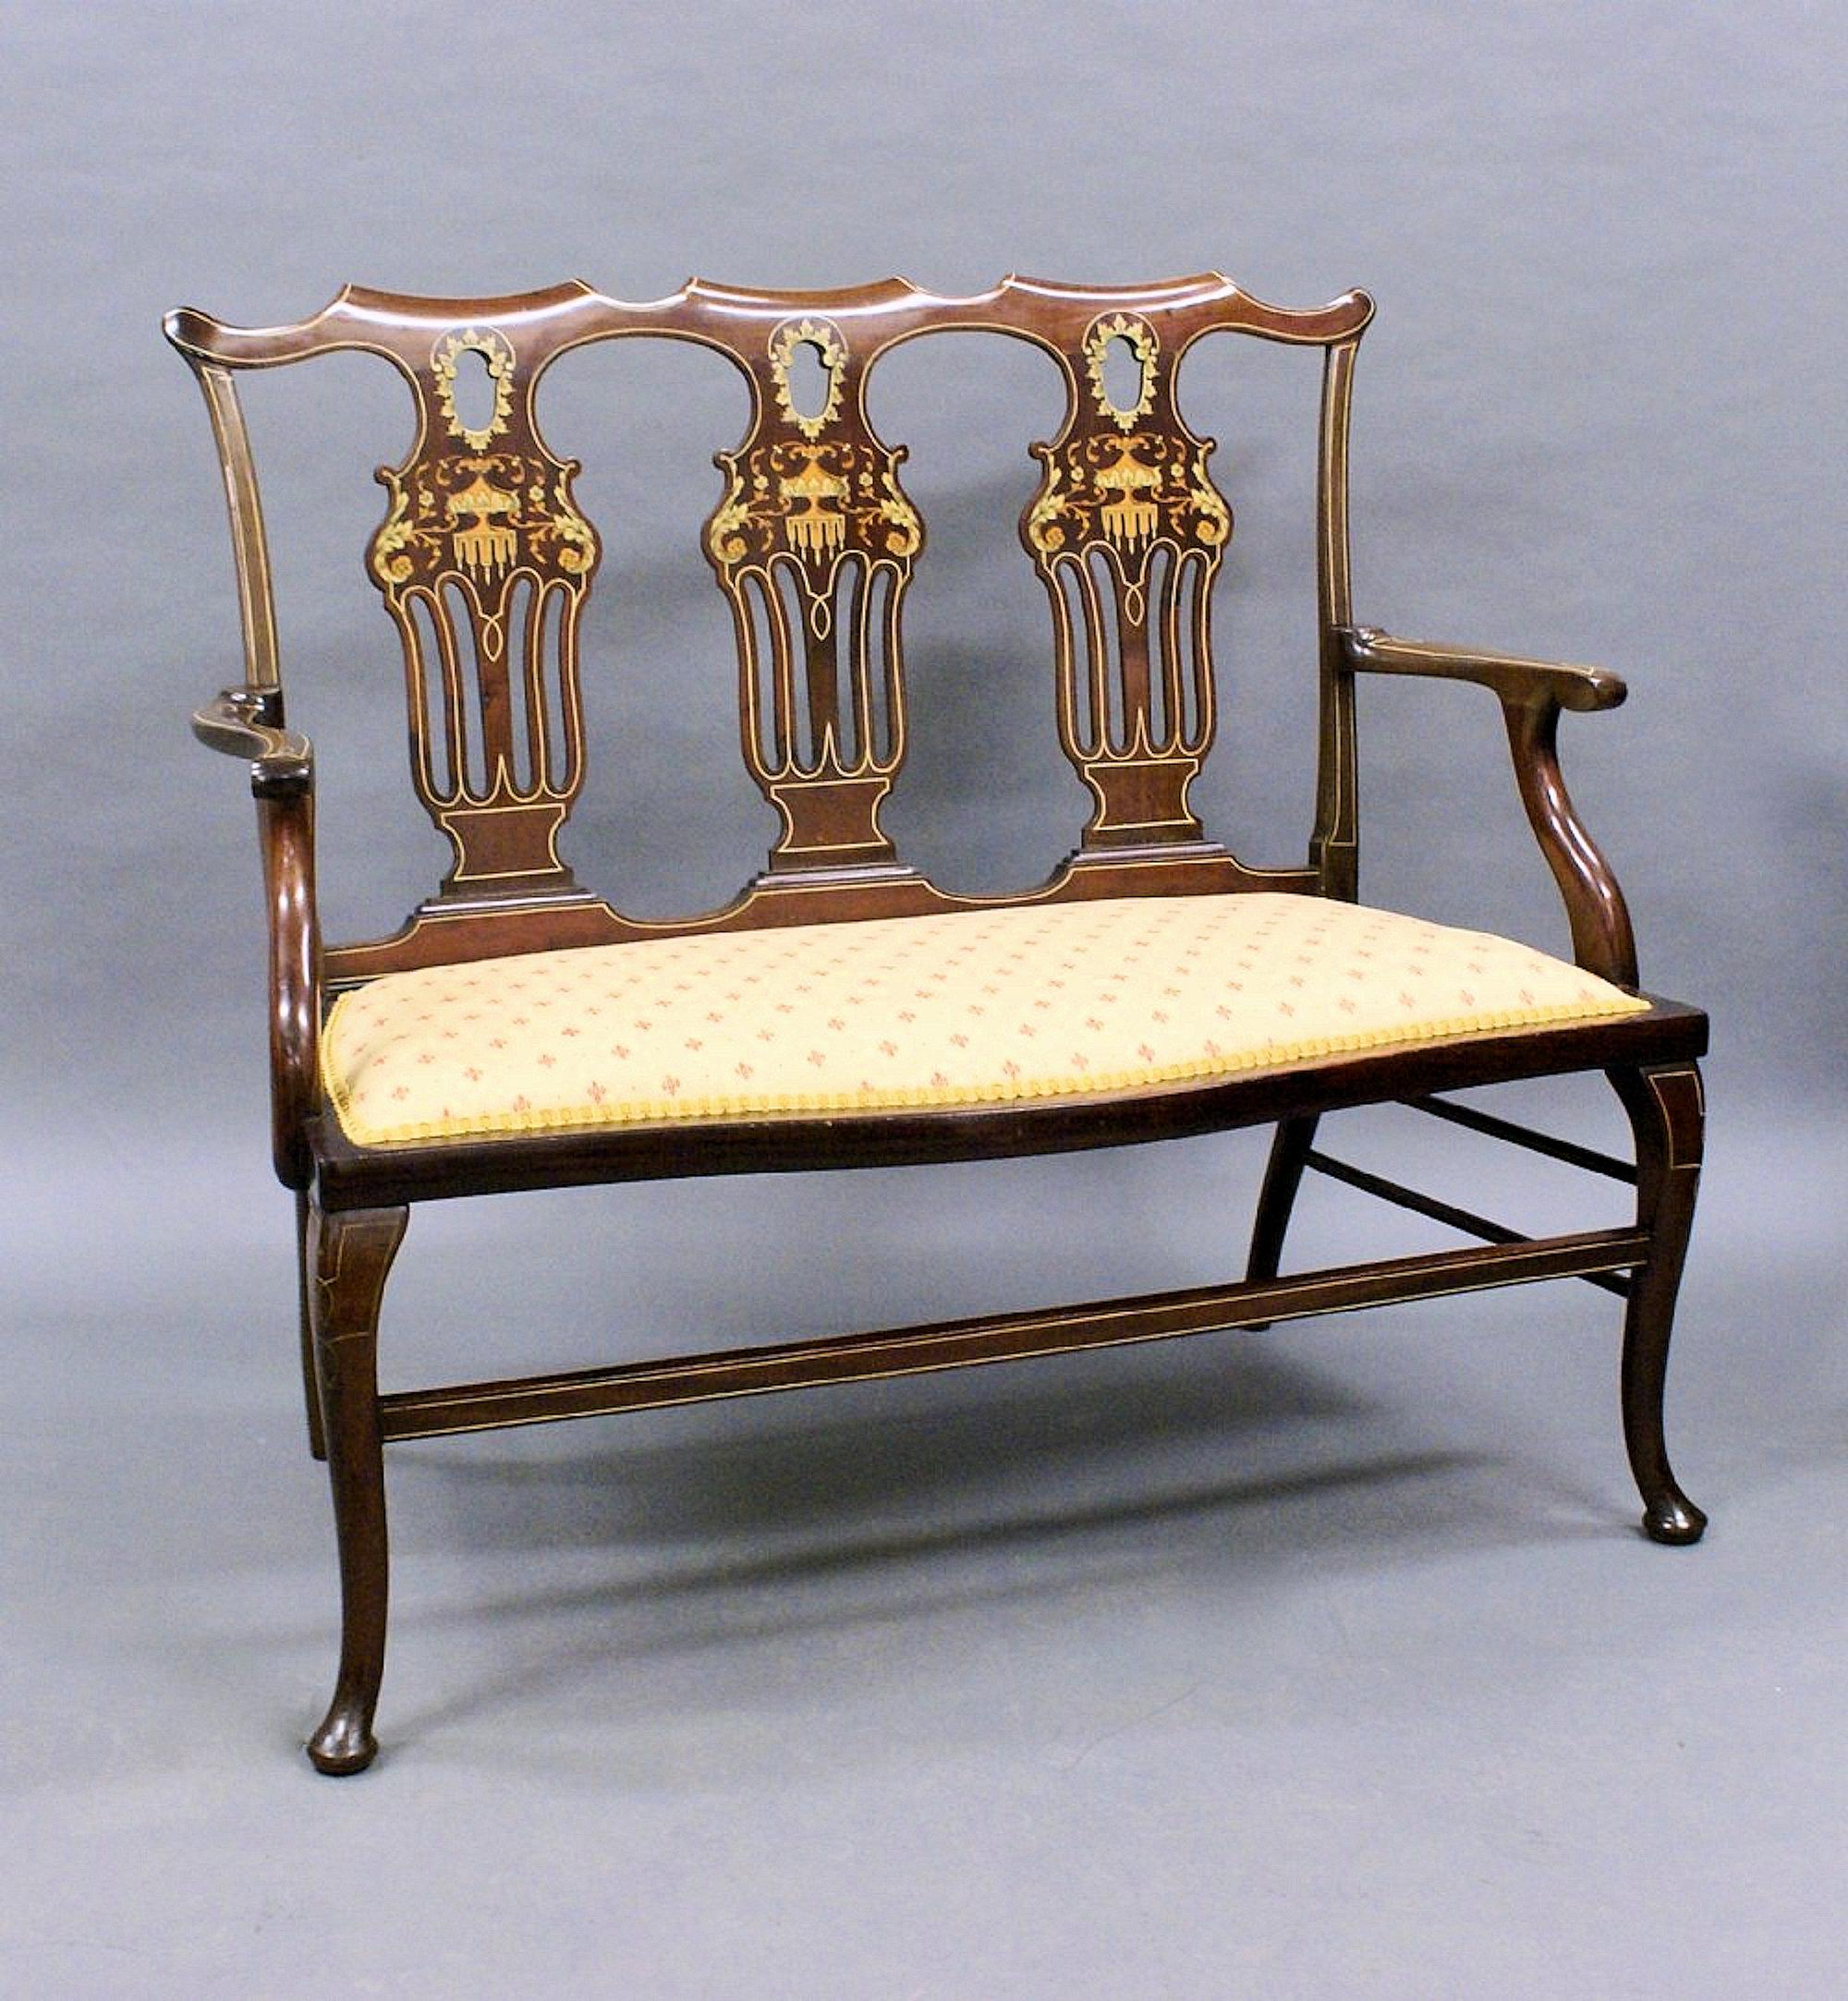 Late 19th Century 19th Century English Inlaid Mahogany Settee For Sale